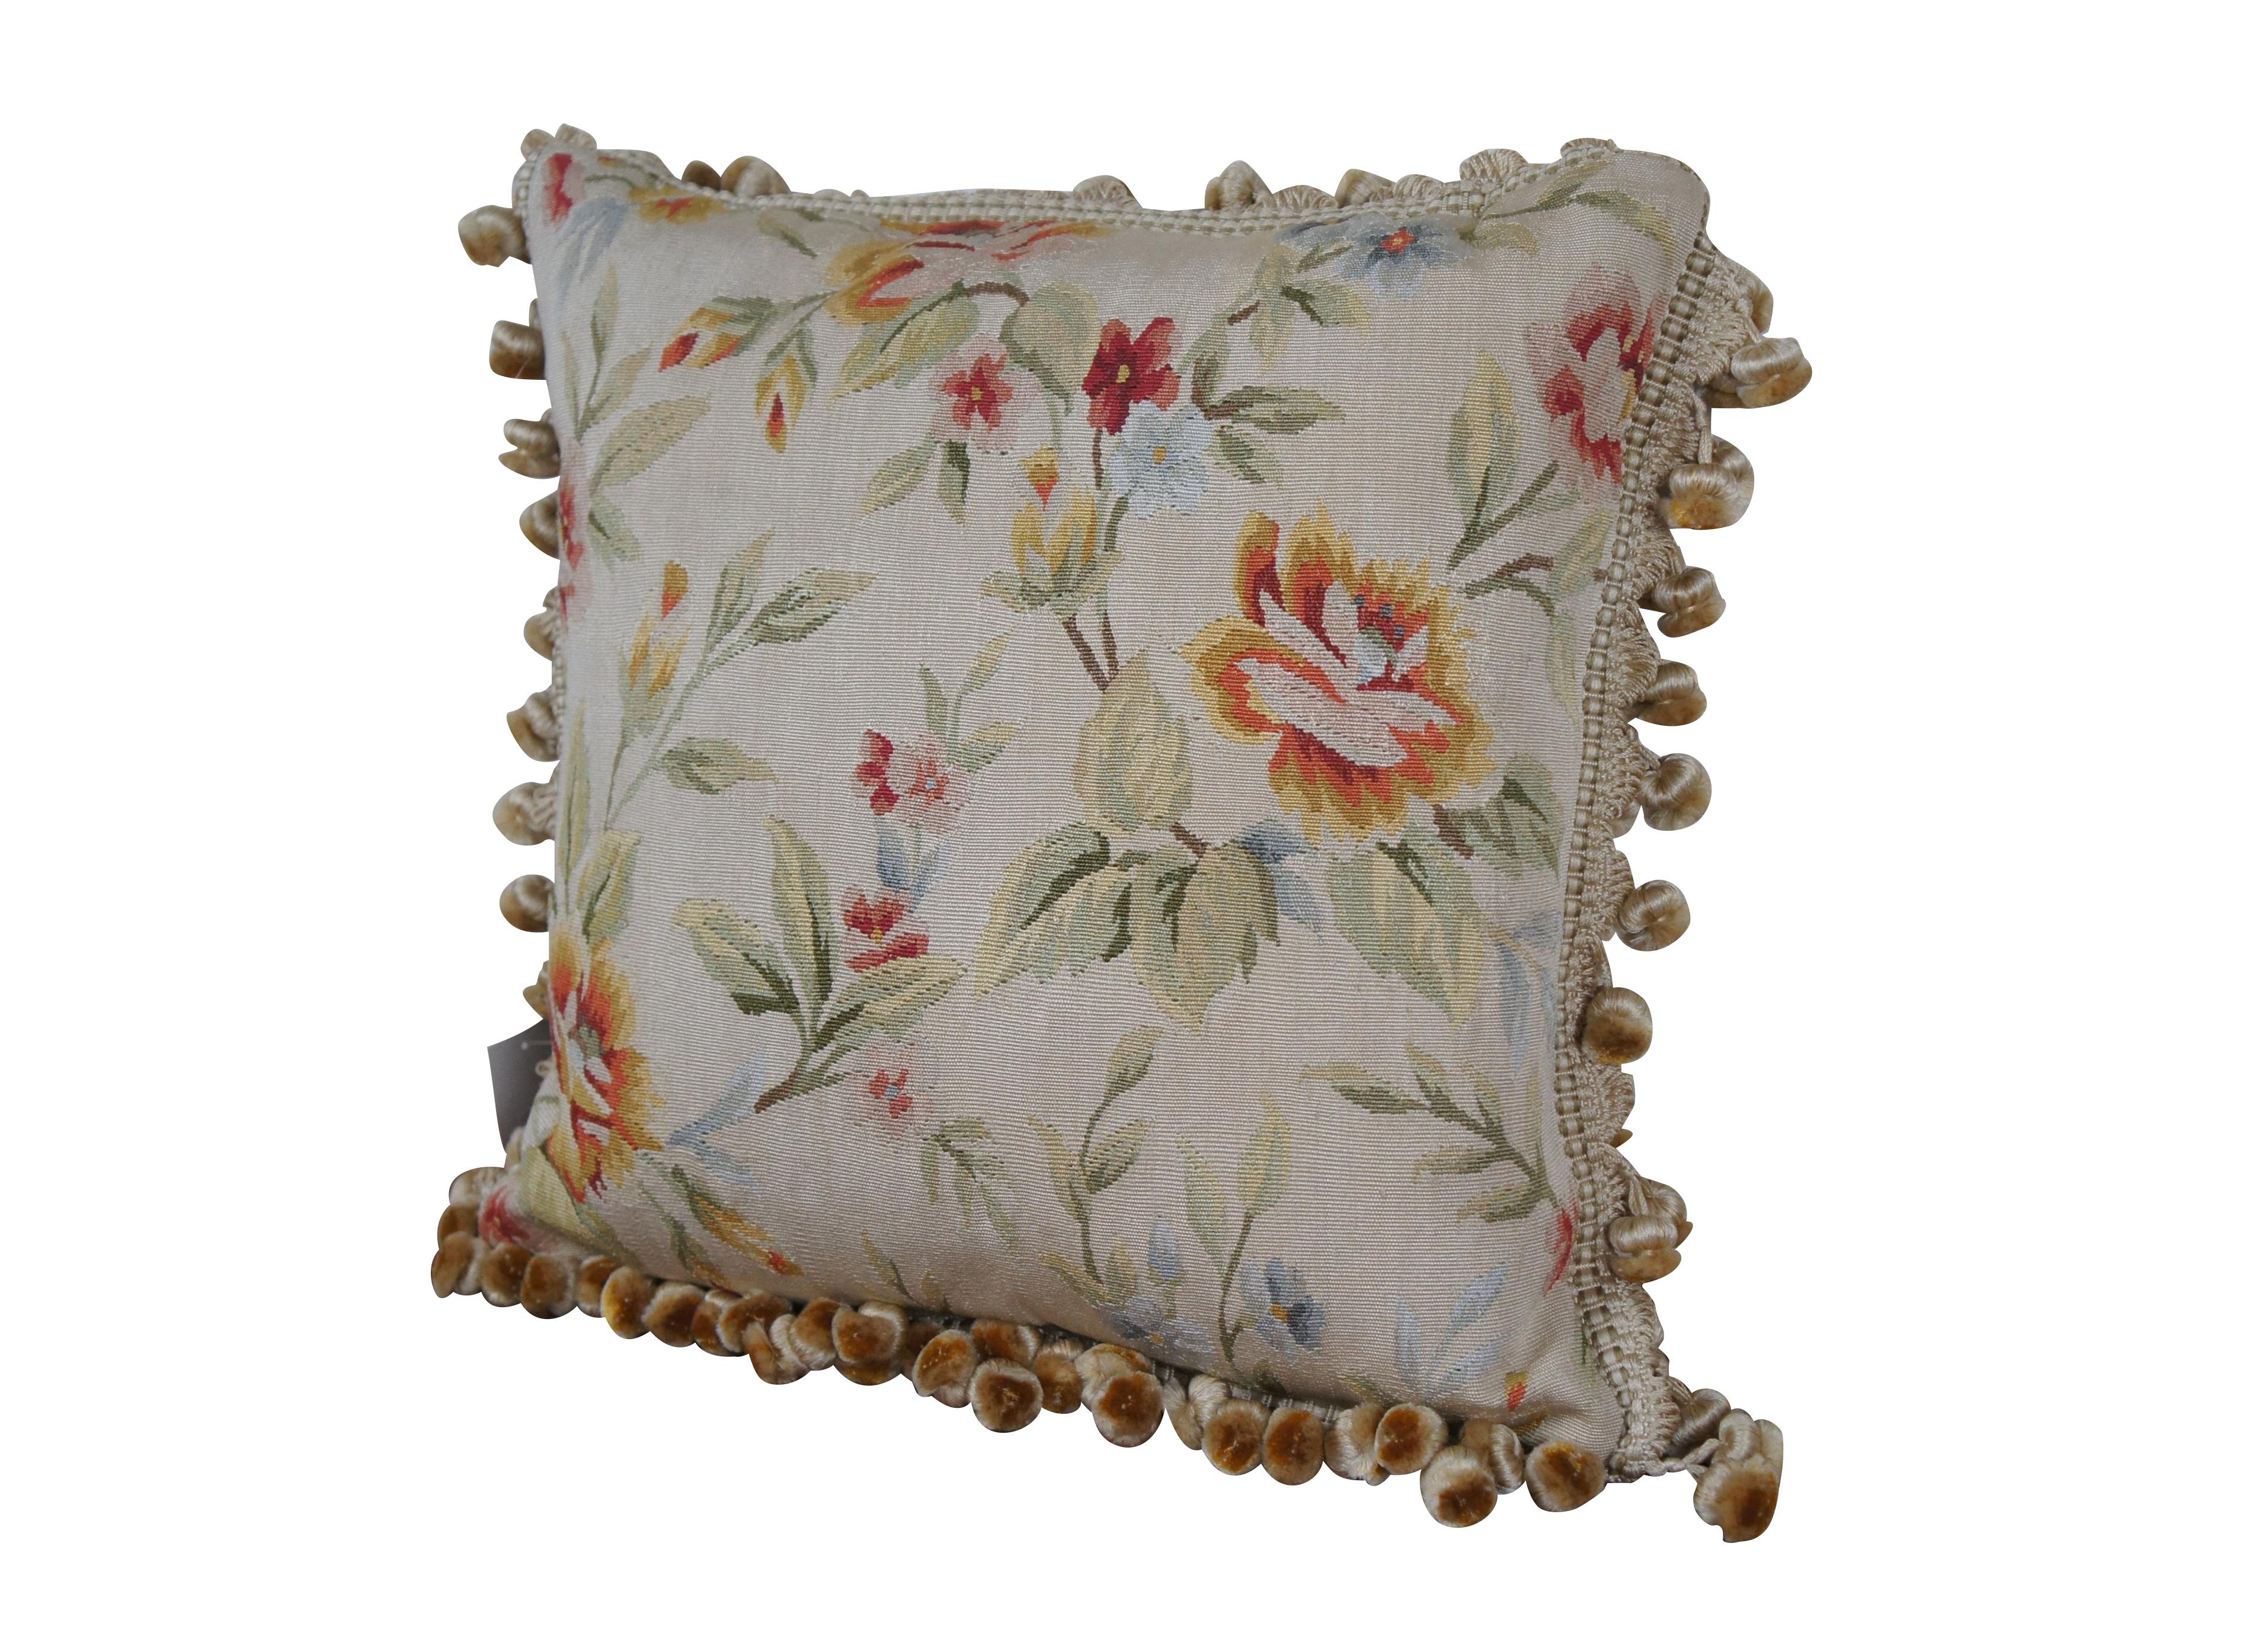 2 Available - 20th century square throw pillow, embroidered in silk with leafy branches of orange, red, and blue flowers. Cream ball tassel trim. Beige velour back with zipper closure. Made in China by Qingdao Lianxing Carpets.

Dimensions:
16